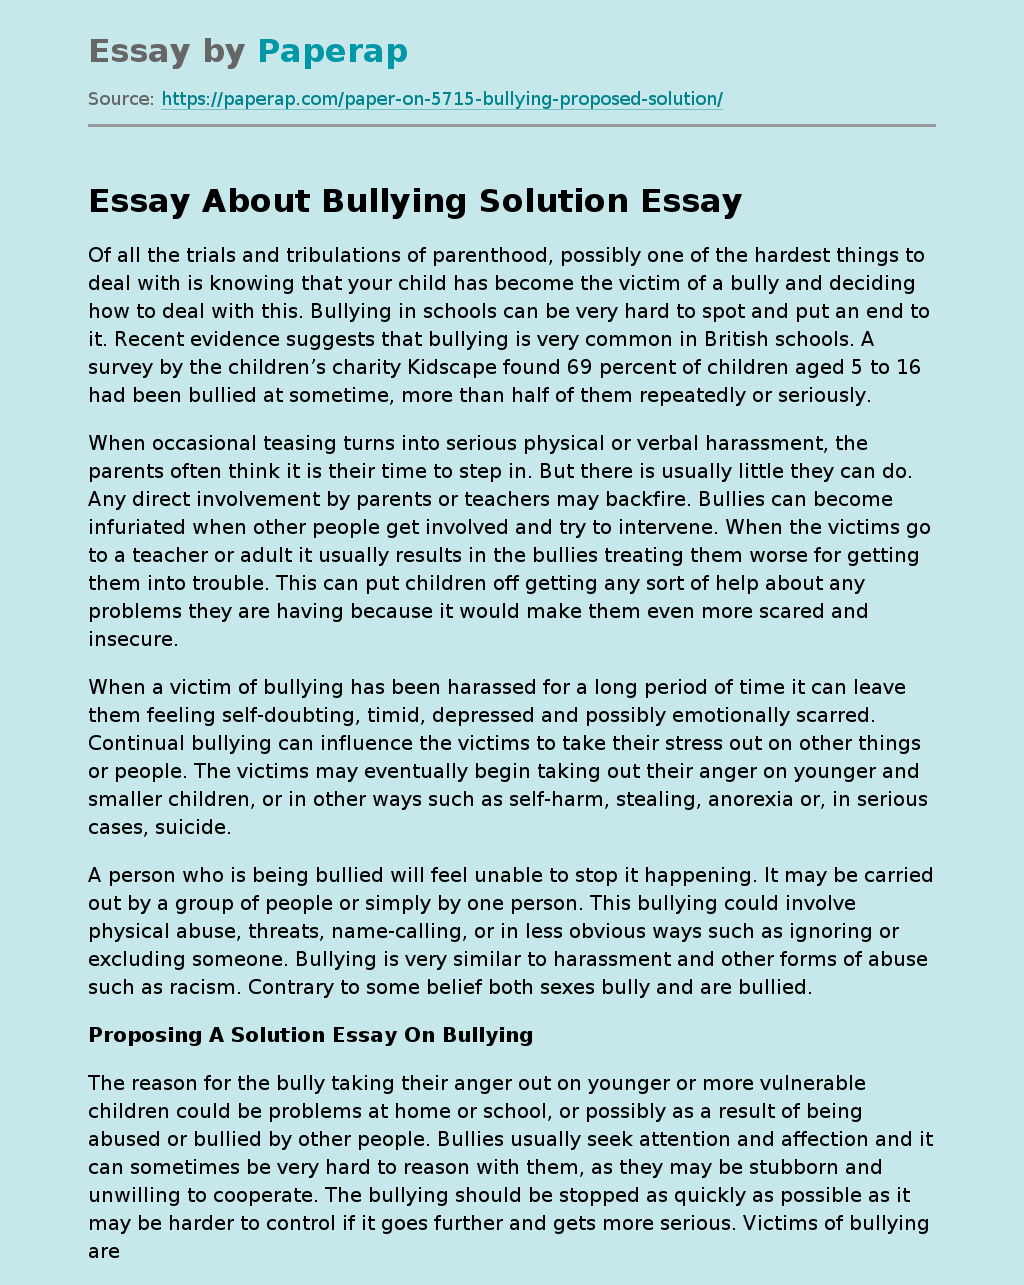 Essay About Bullying Solution